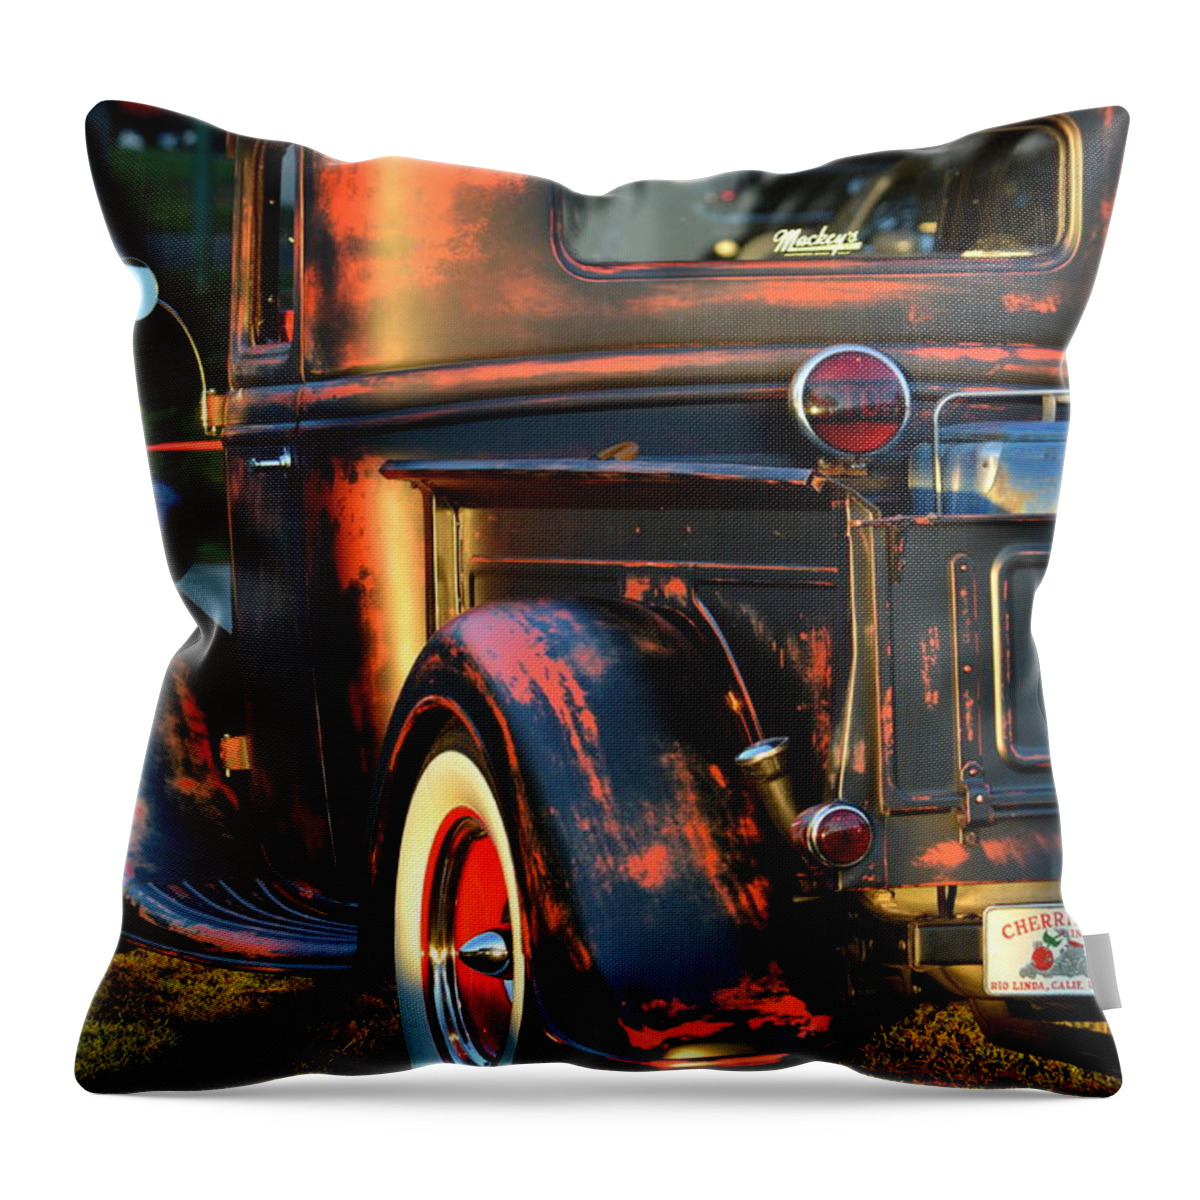  Throw Pillow featuring the photograph Classic Ford Pickup by Dean Ferreira